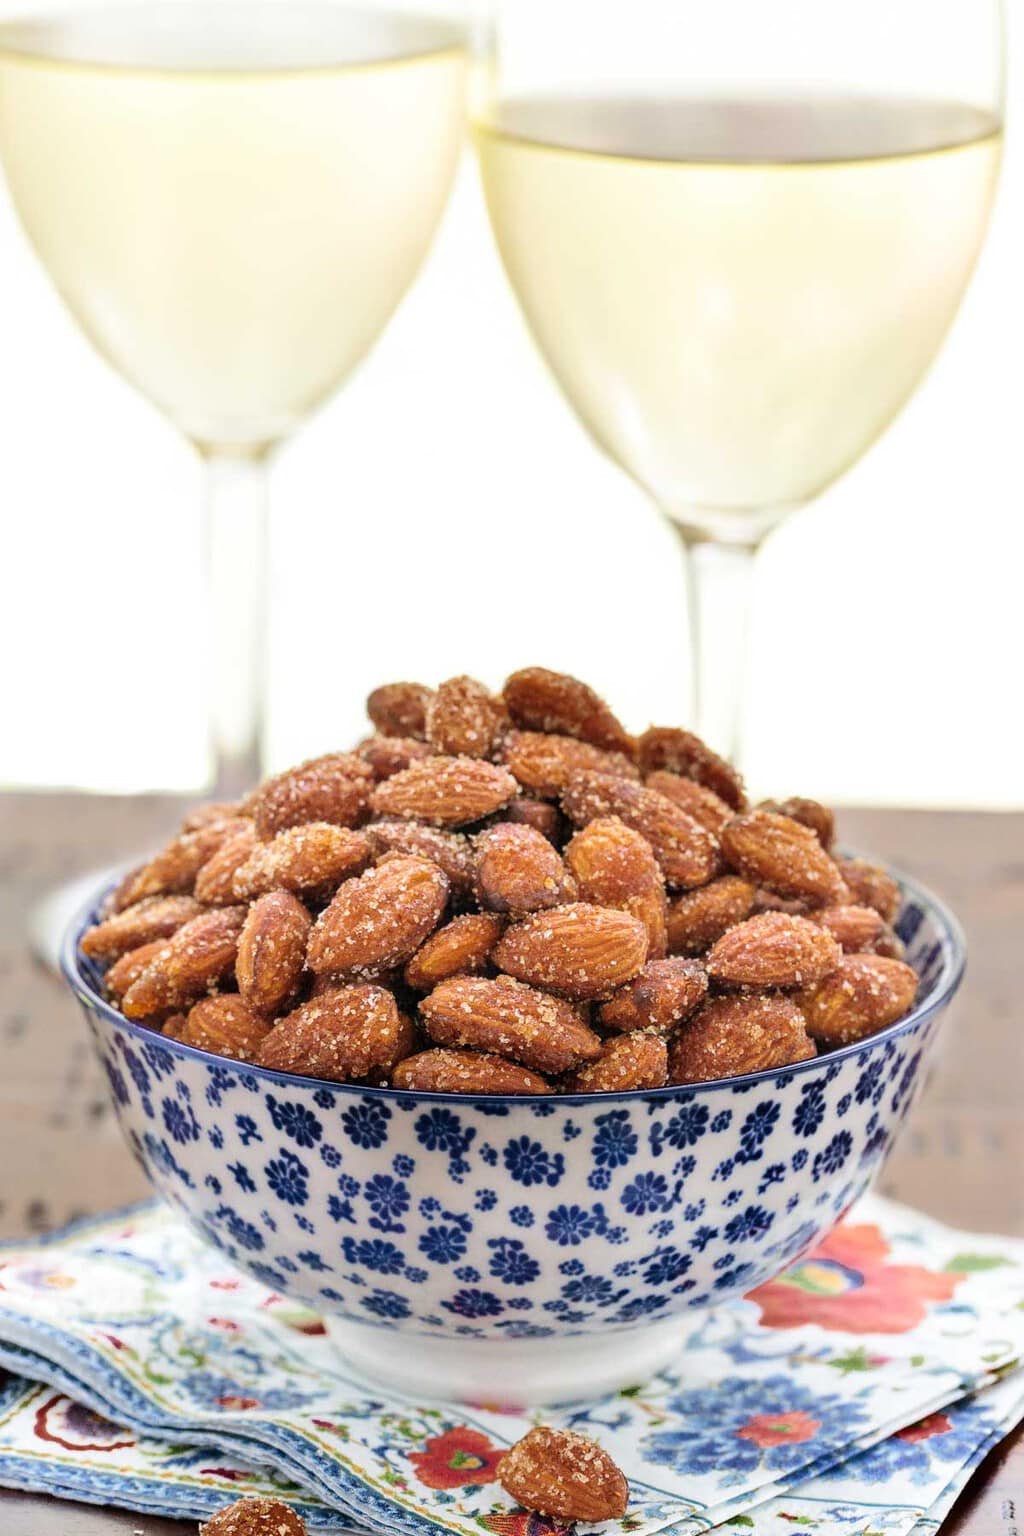 Vertical picture of Sweet and Spicy Almonds in a blue and white bowl in front of two glasses of white wine